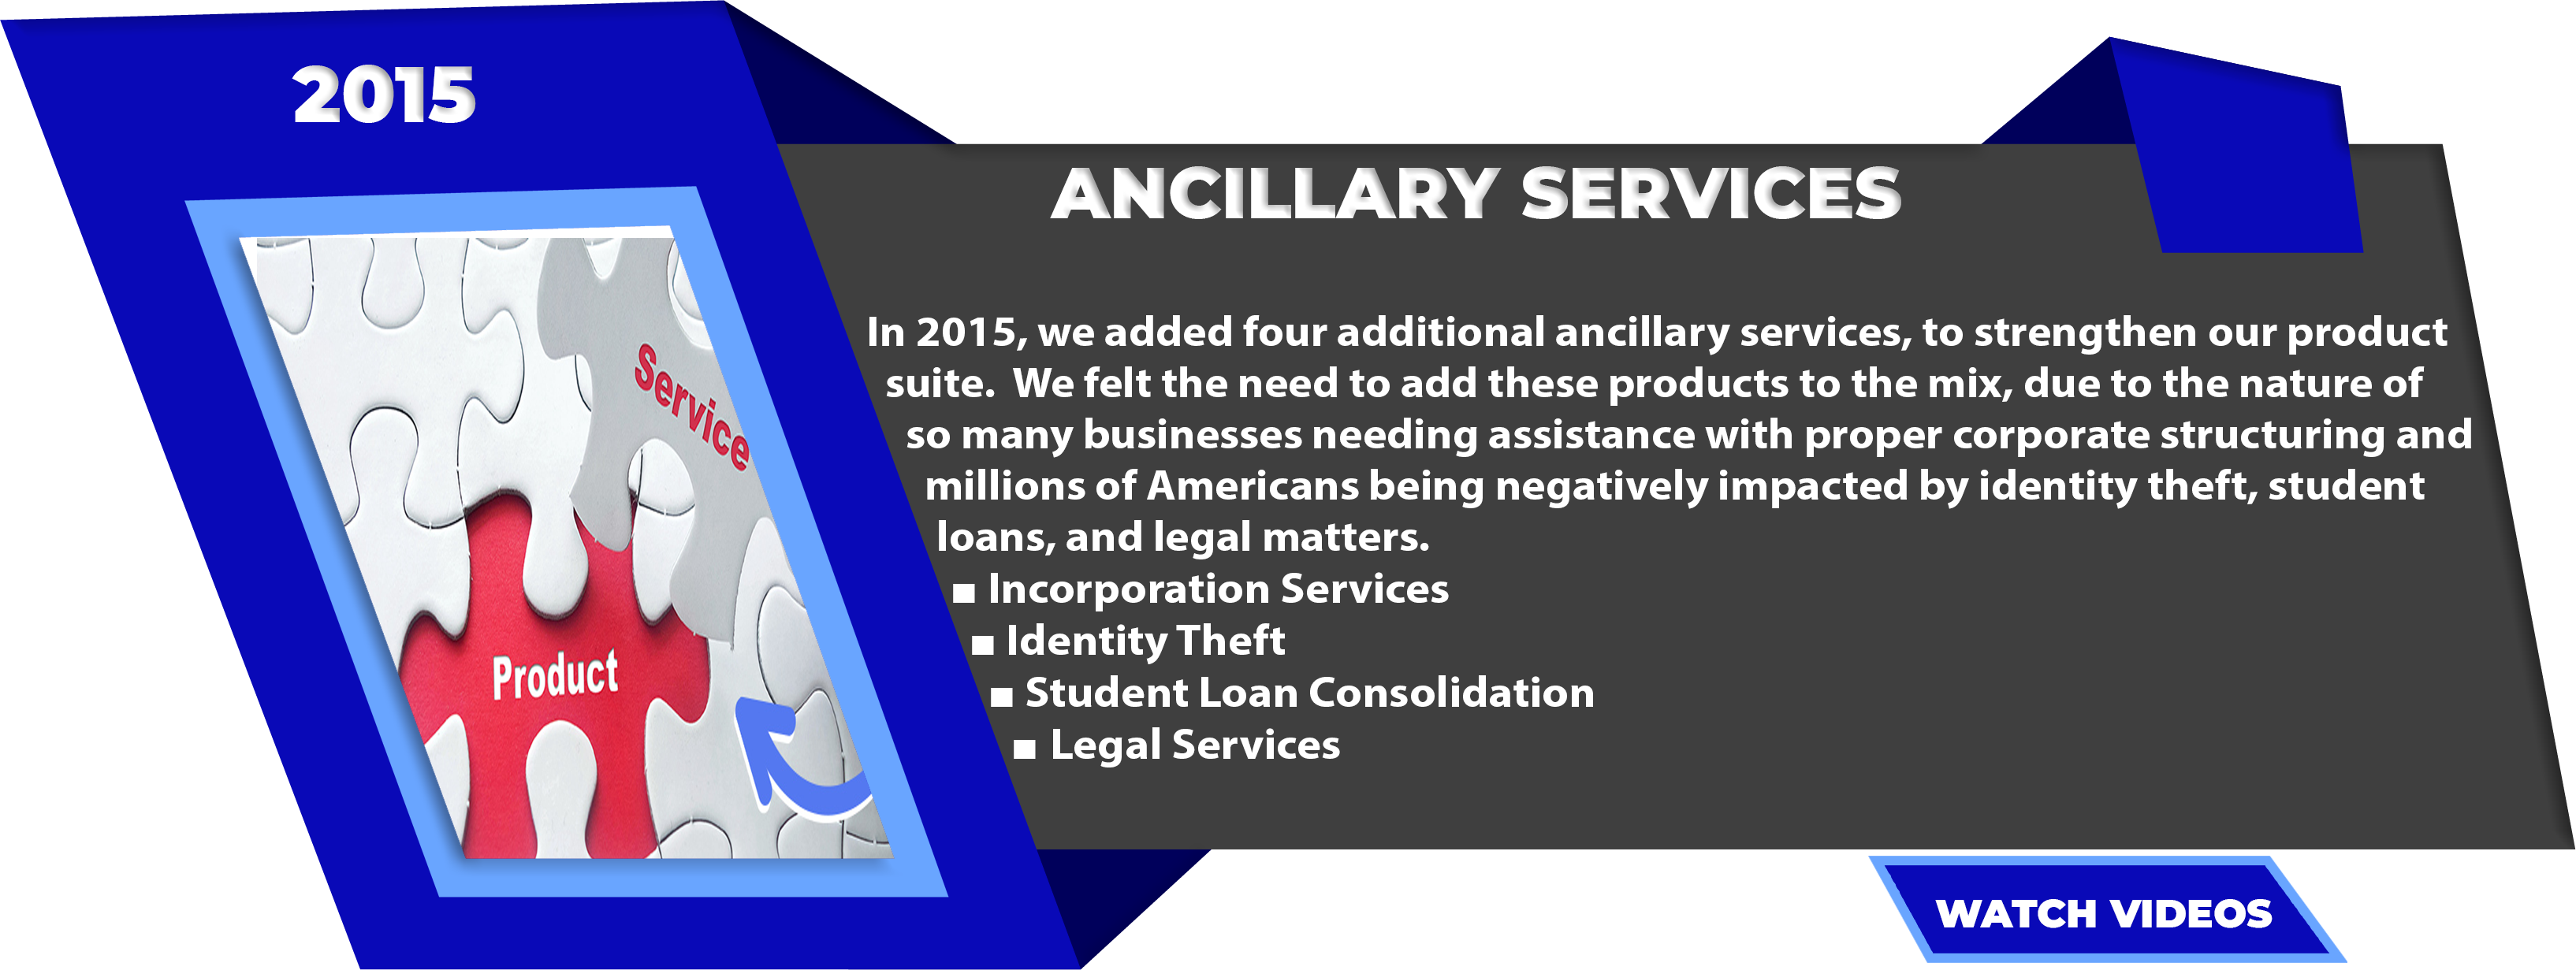 Launched-Our-Ancillary-Services-2015-1